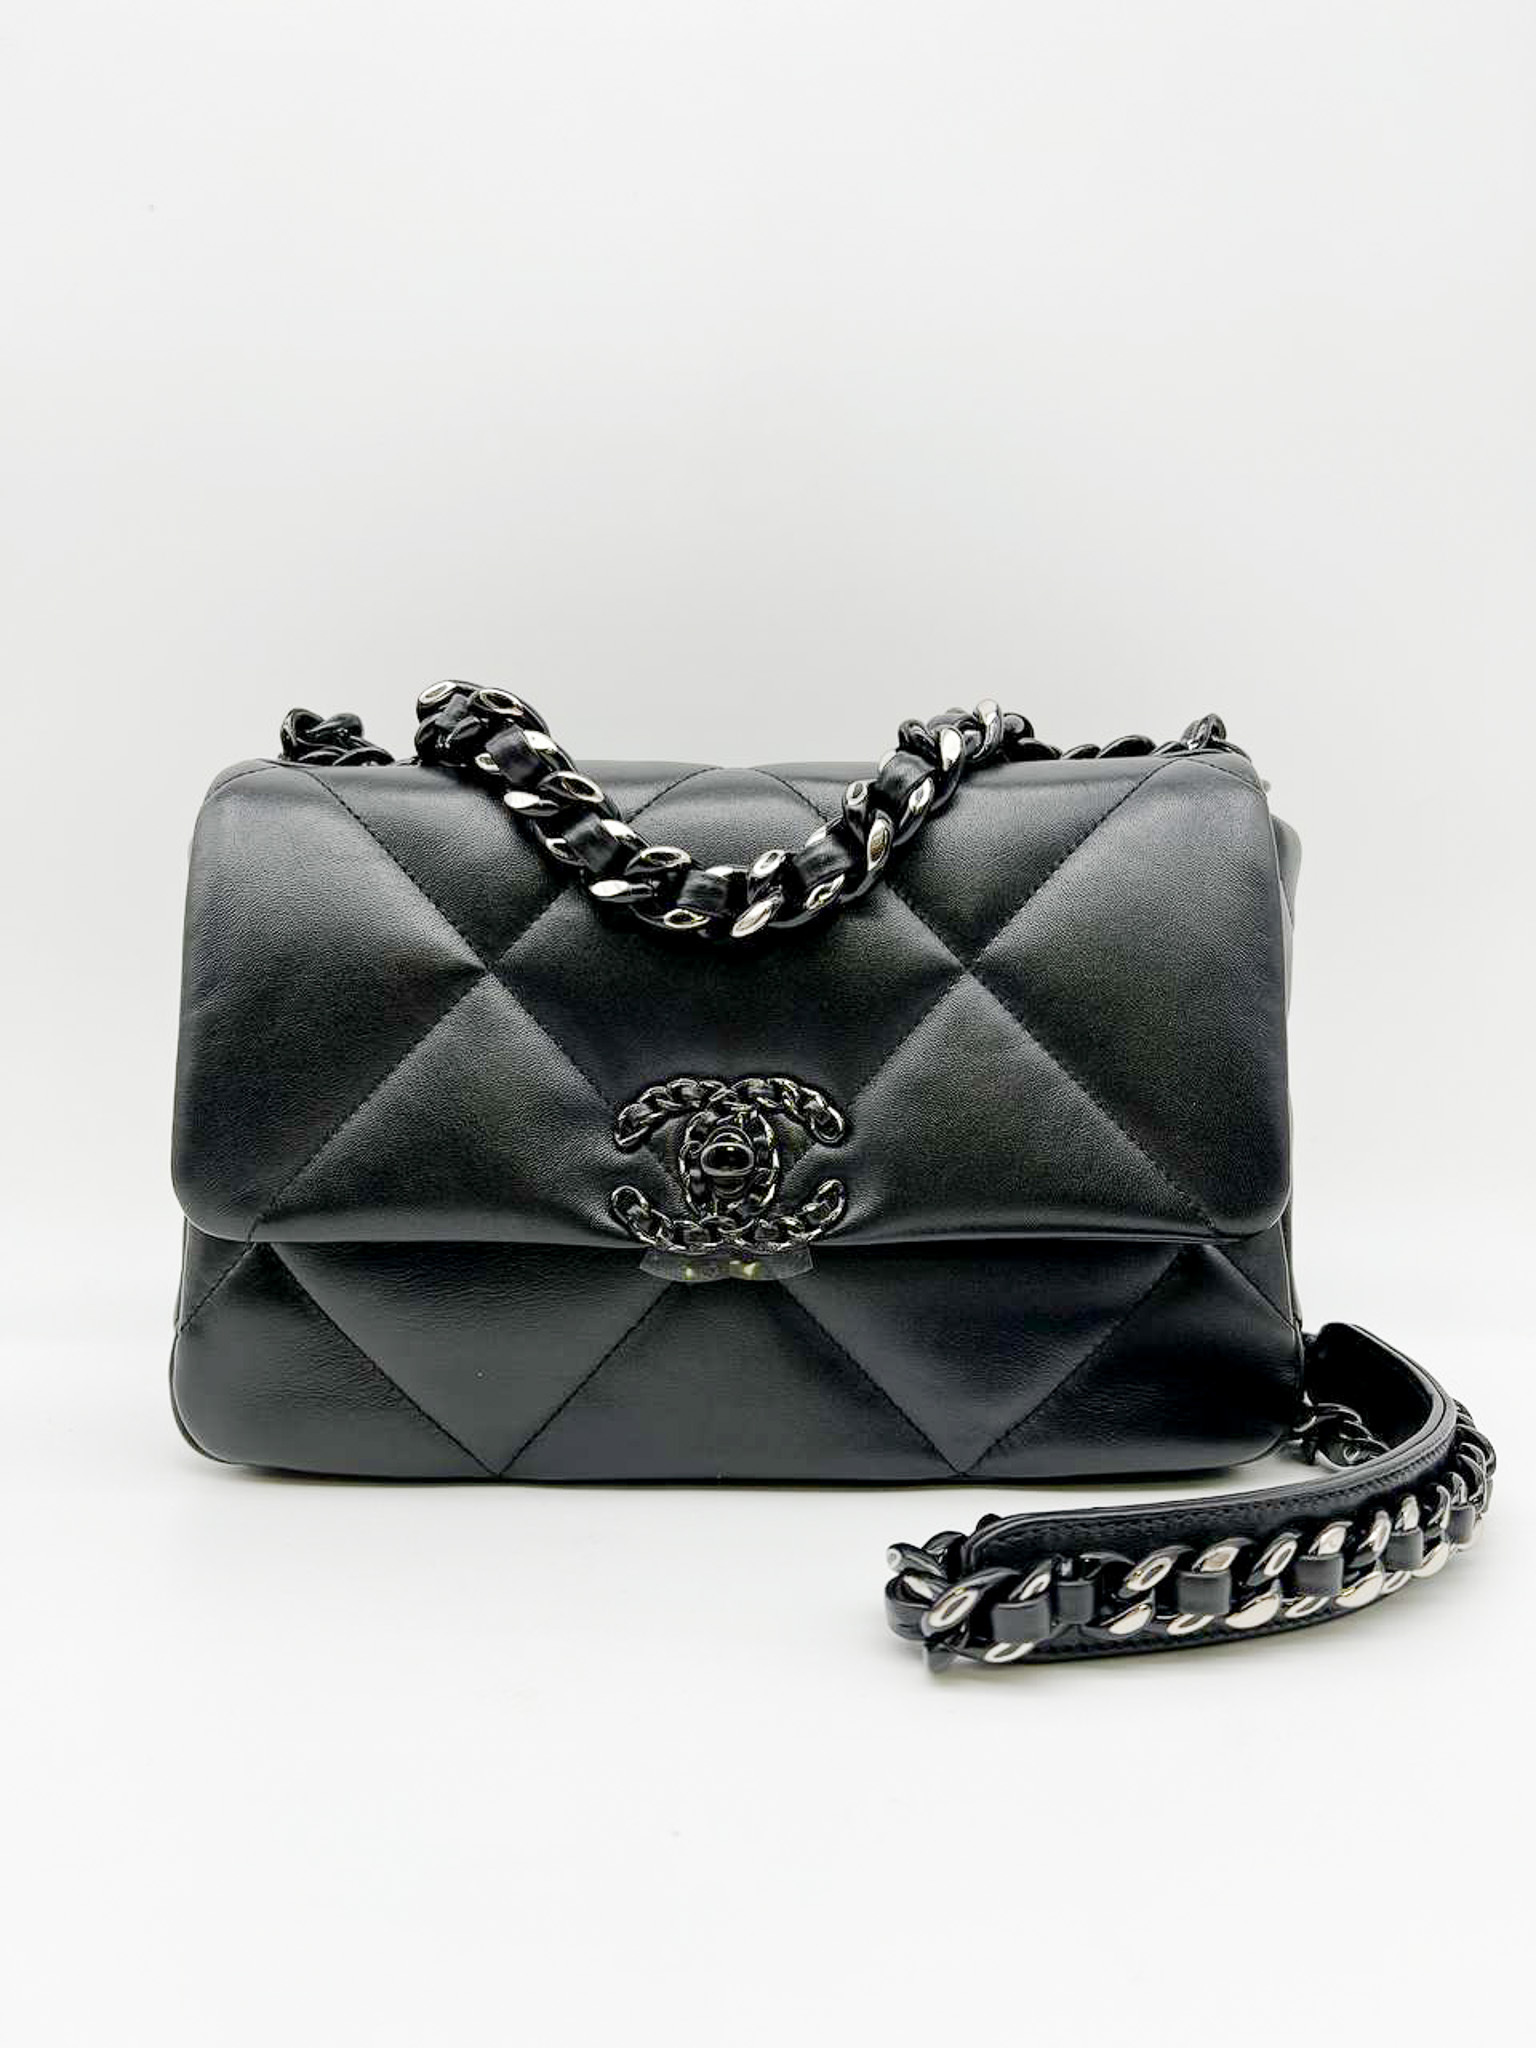 Chanel 19 Small, Black Leather with Mixed So Black and Silver